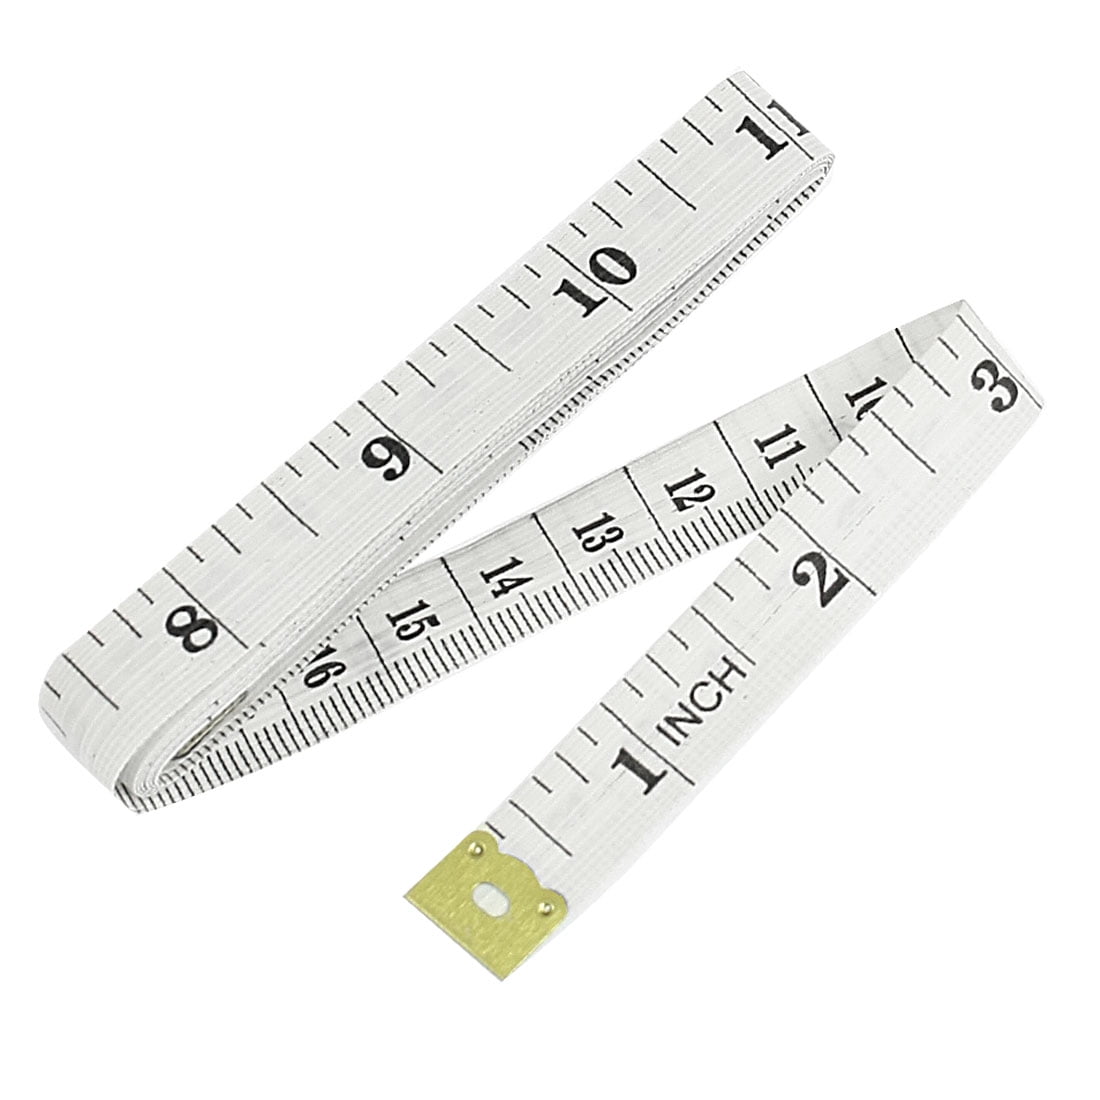 Retractable Soft Ruler Tape Tailor Sewing Cloth Diet Measuring 60Inch/150cmcb 